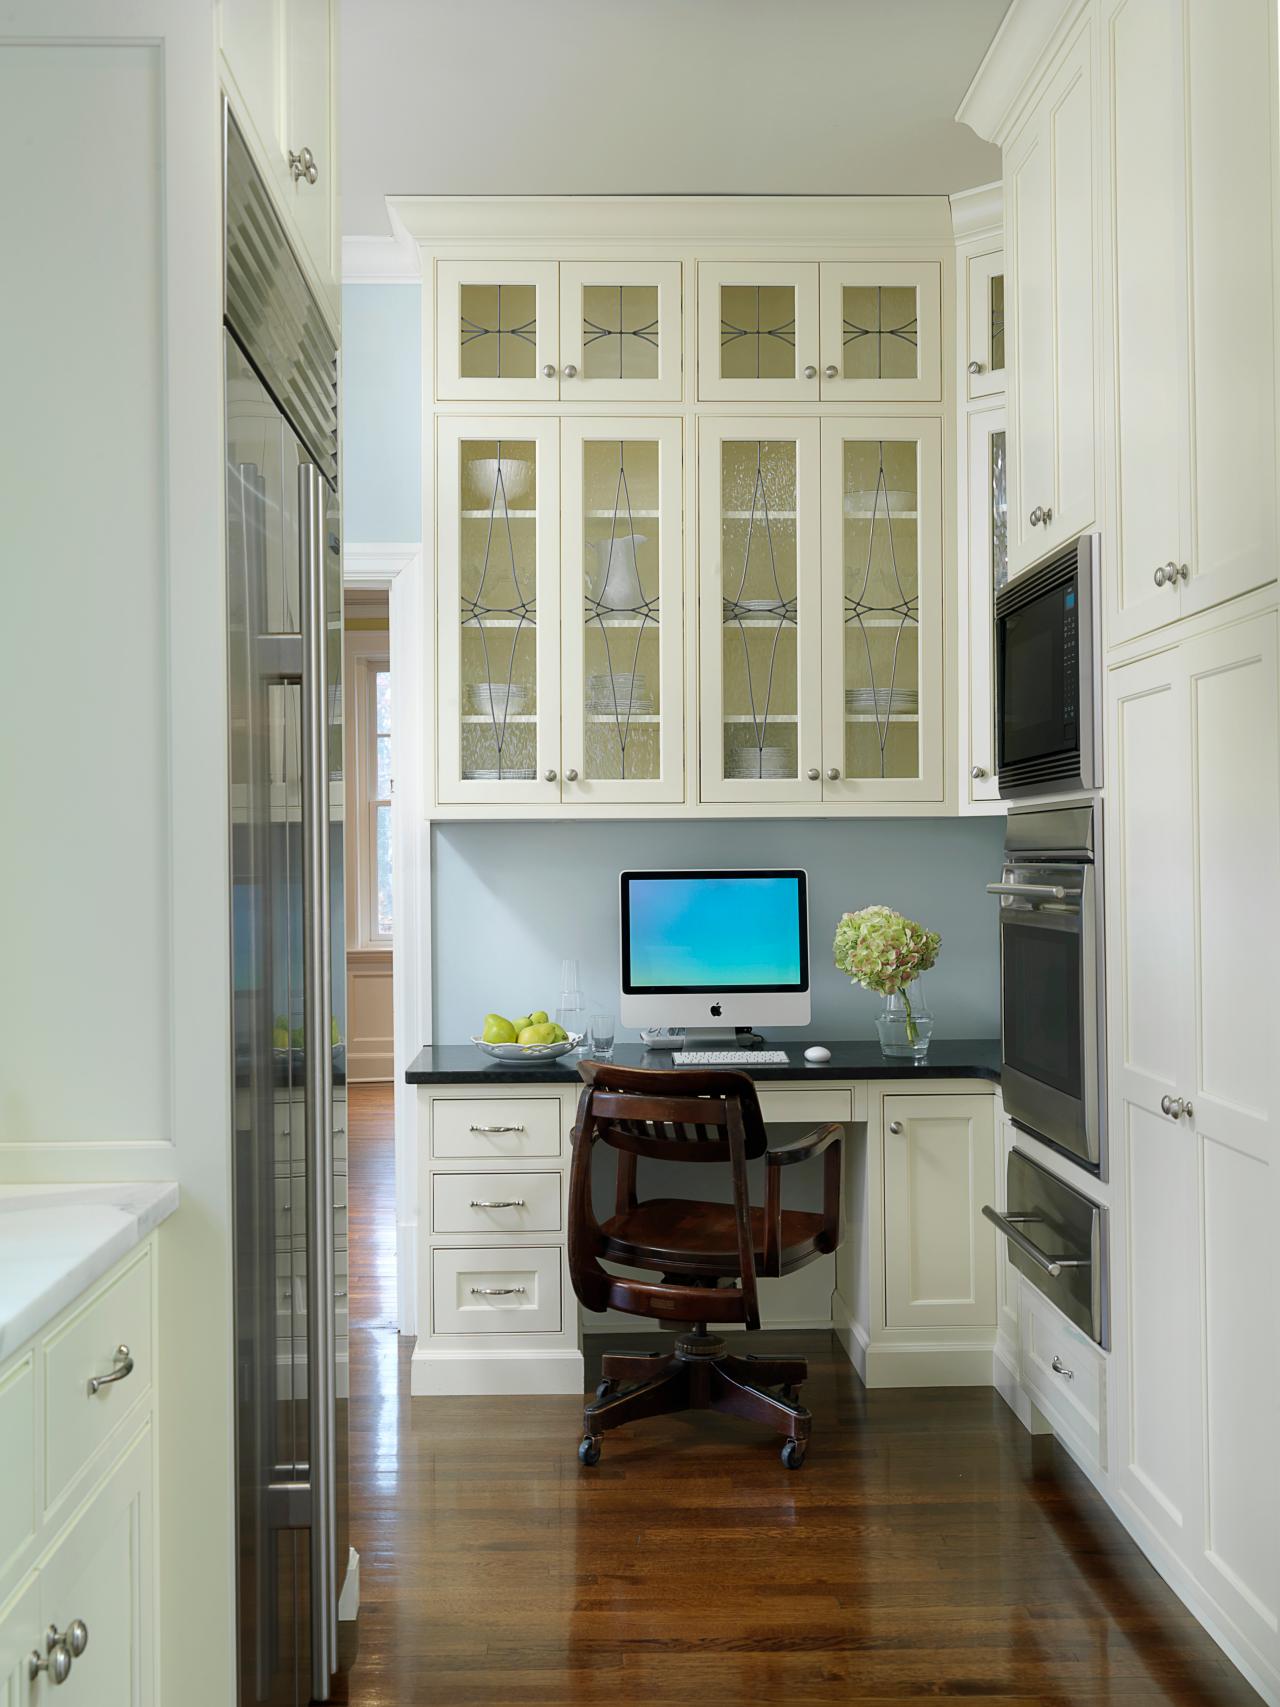 Traditional Kitchen Office Space With White Cabinets | HGTV